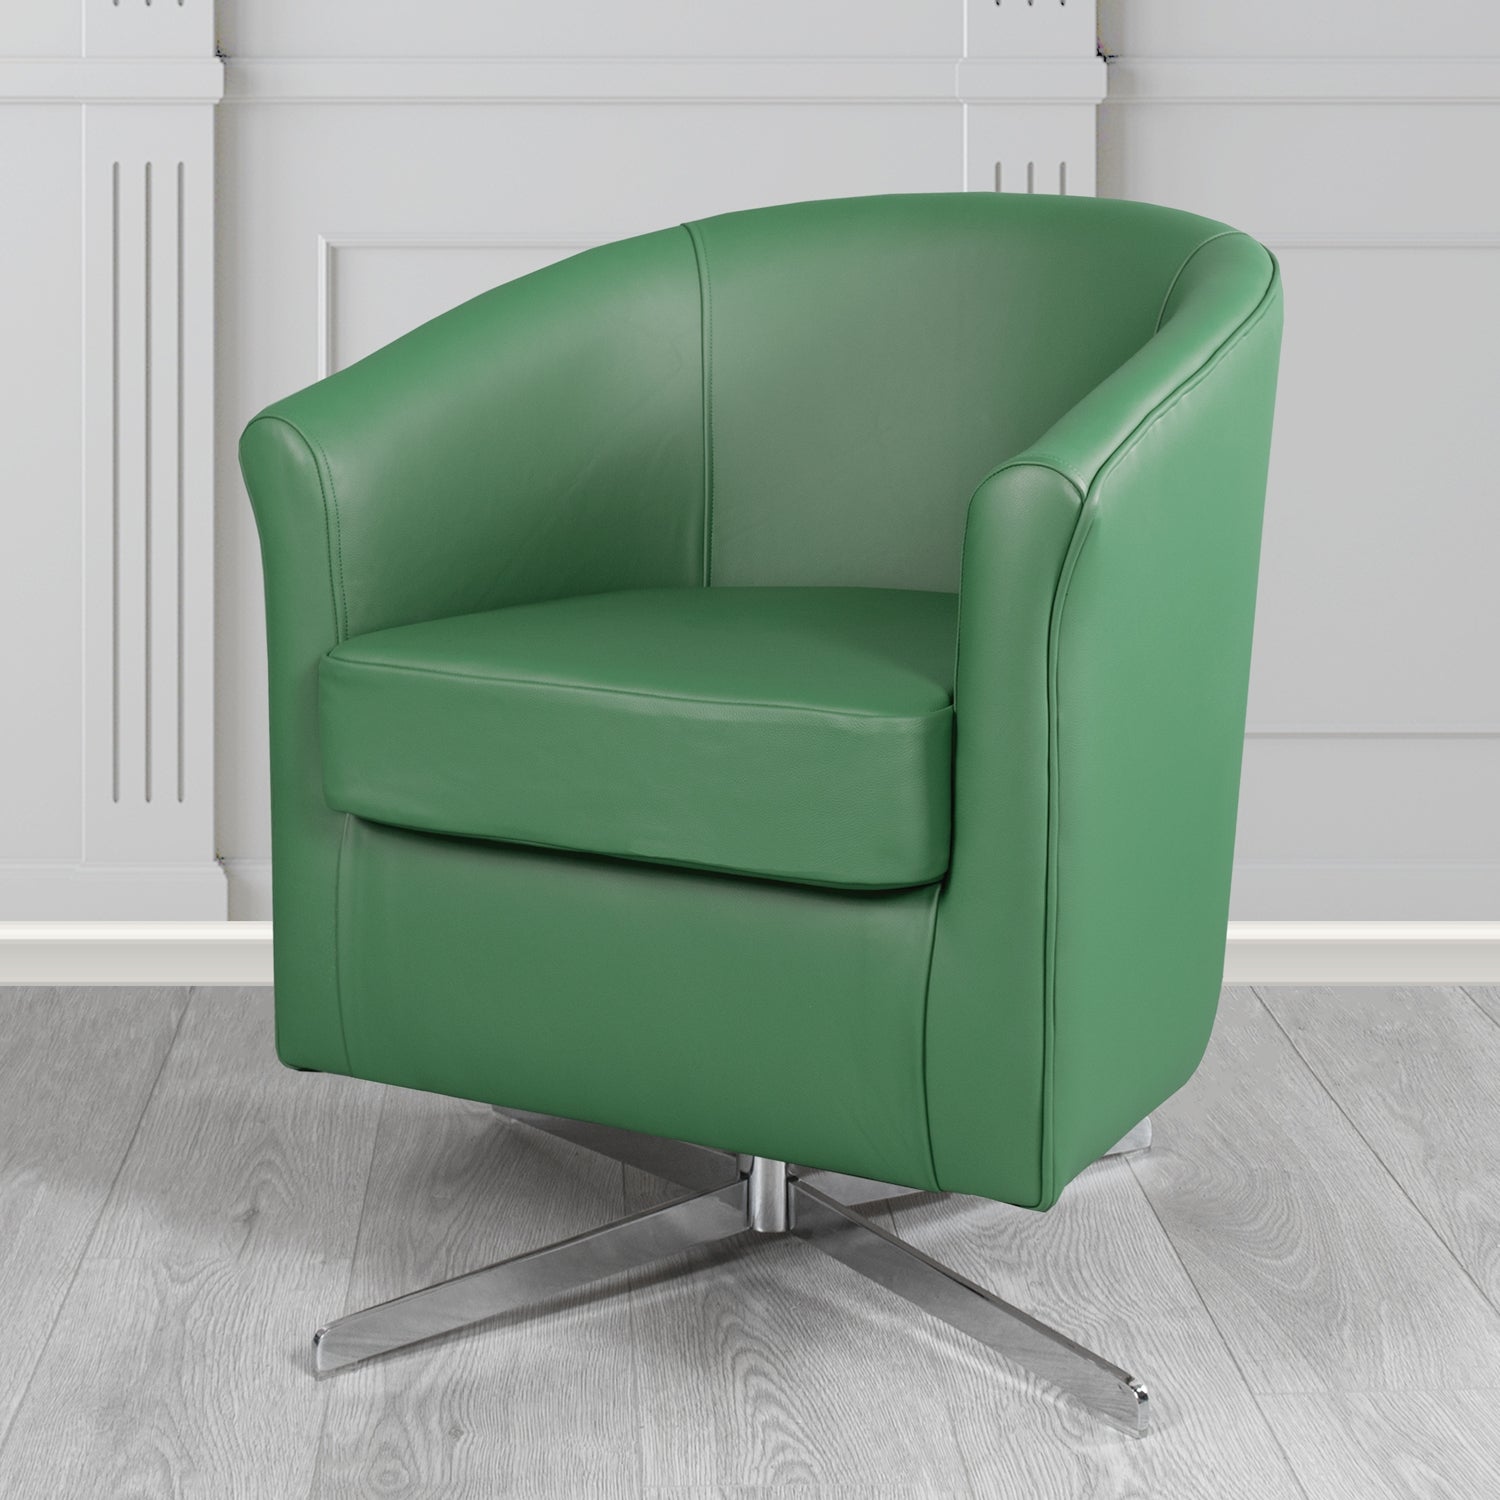 Cannes Swivel Tub Chair in Shelly Jade Green Crib 5 Genuine Leather - The Tub Chair Shop